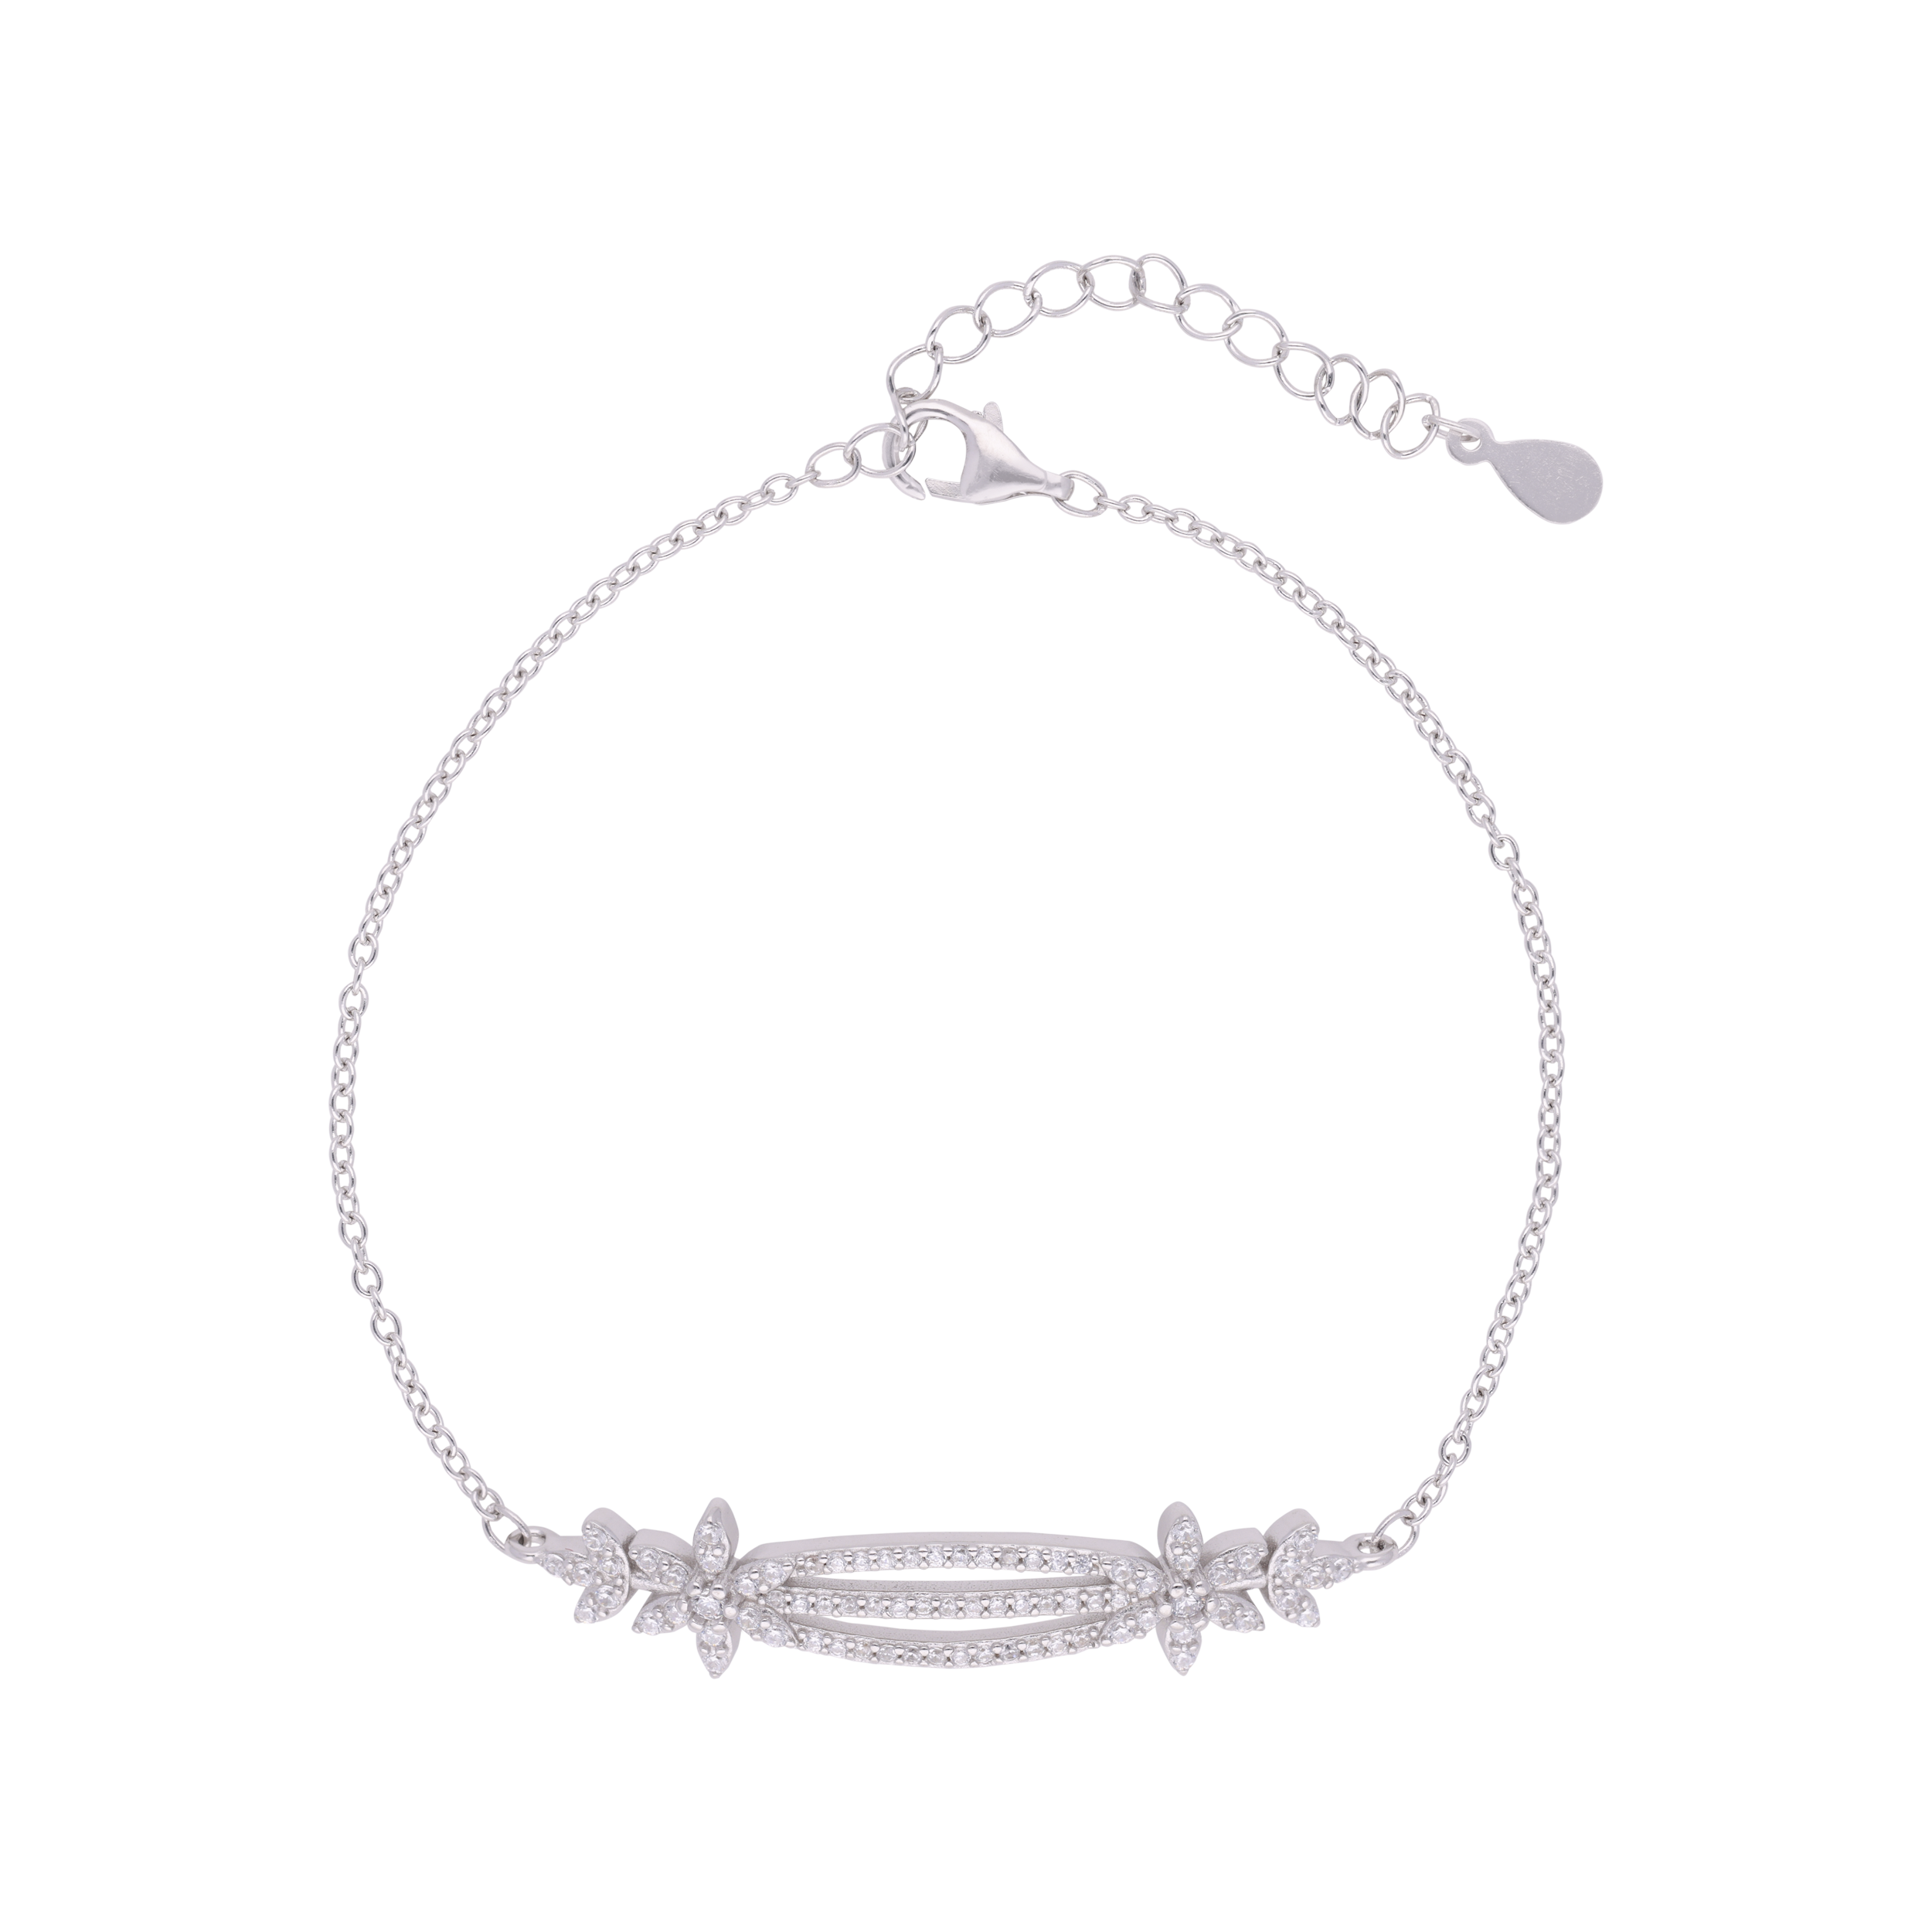 Sterling Silver Floral Design Chain Bracelet with Cubic Zirconia | SKU : 0003115329, 0003115282, 0003115367